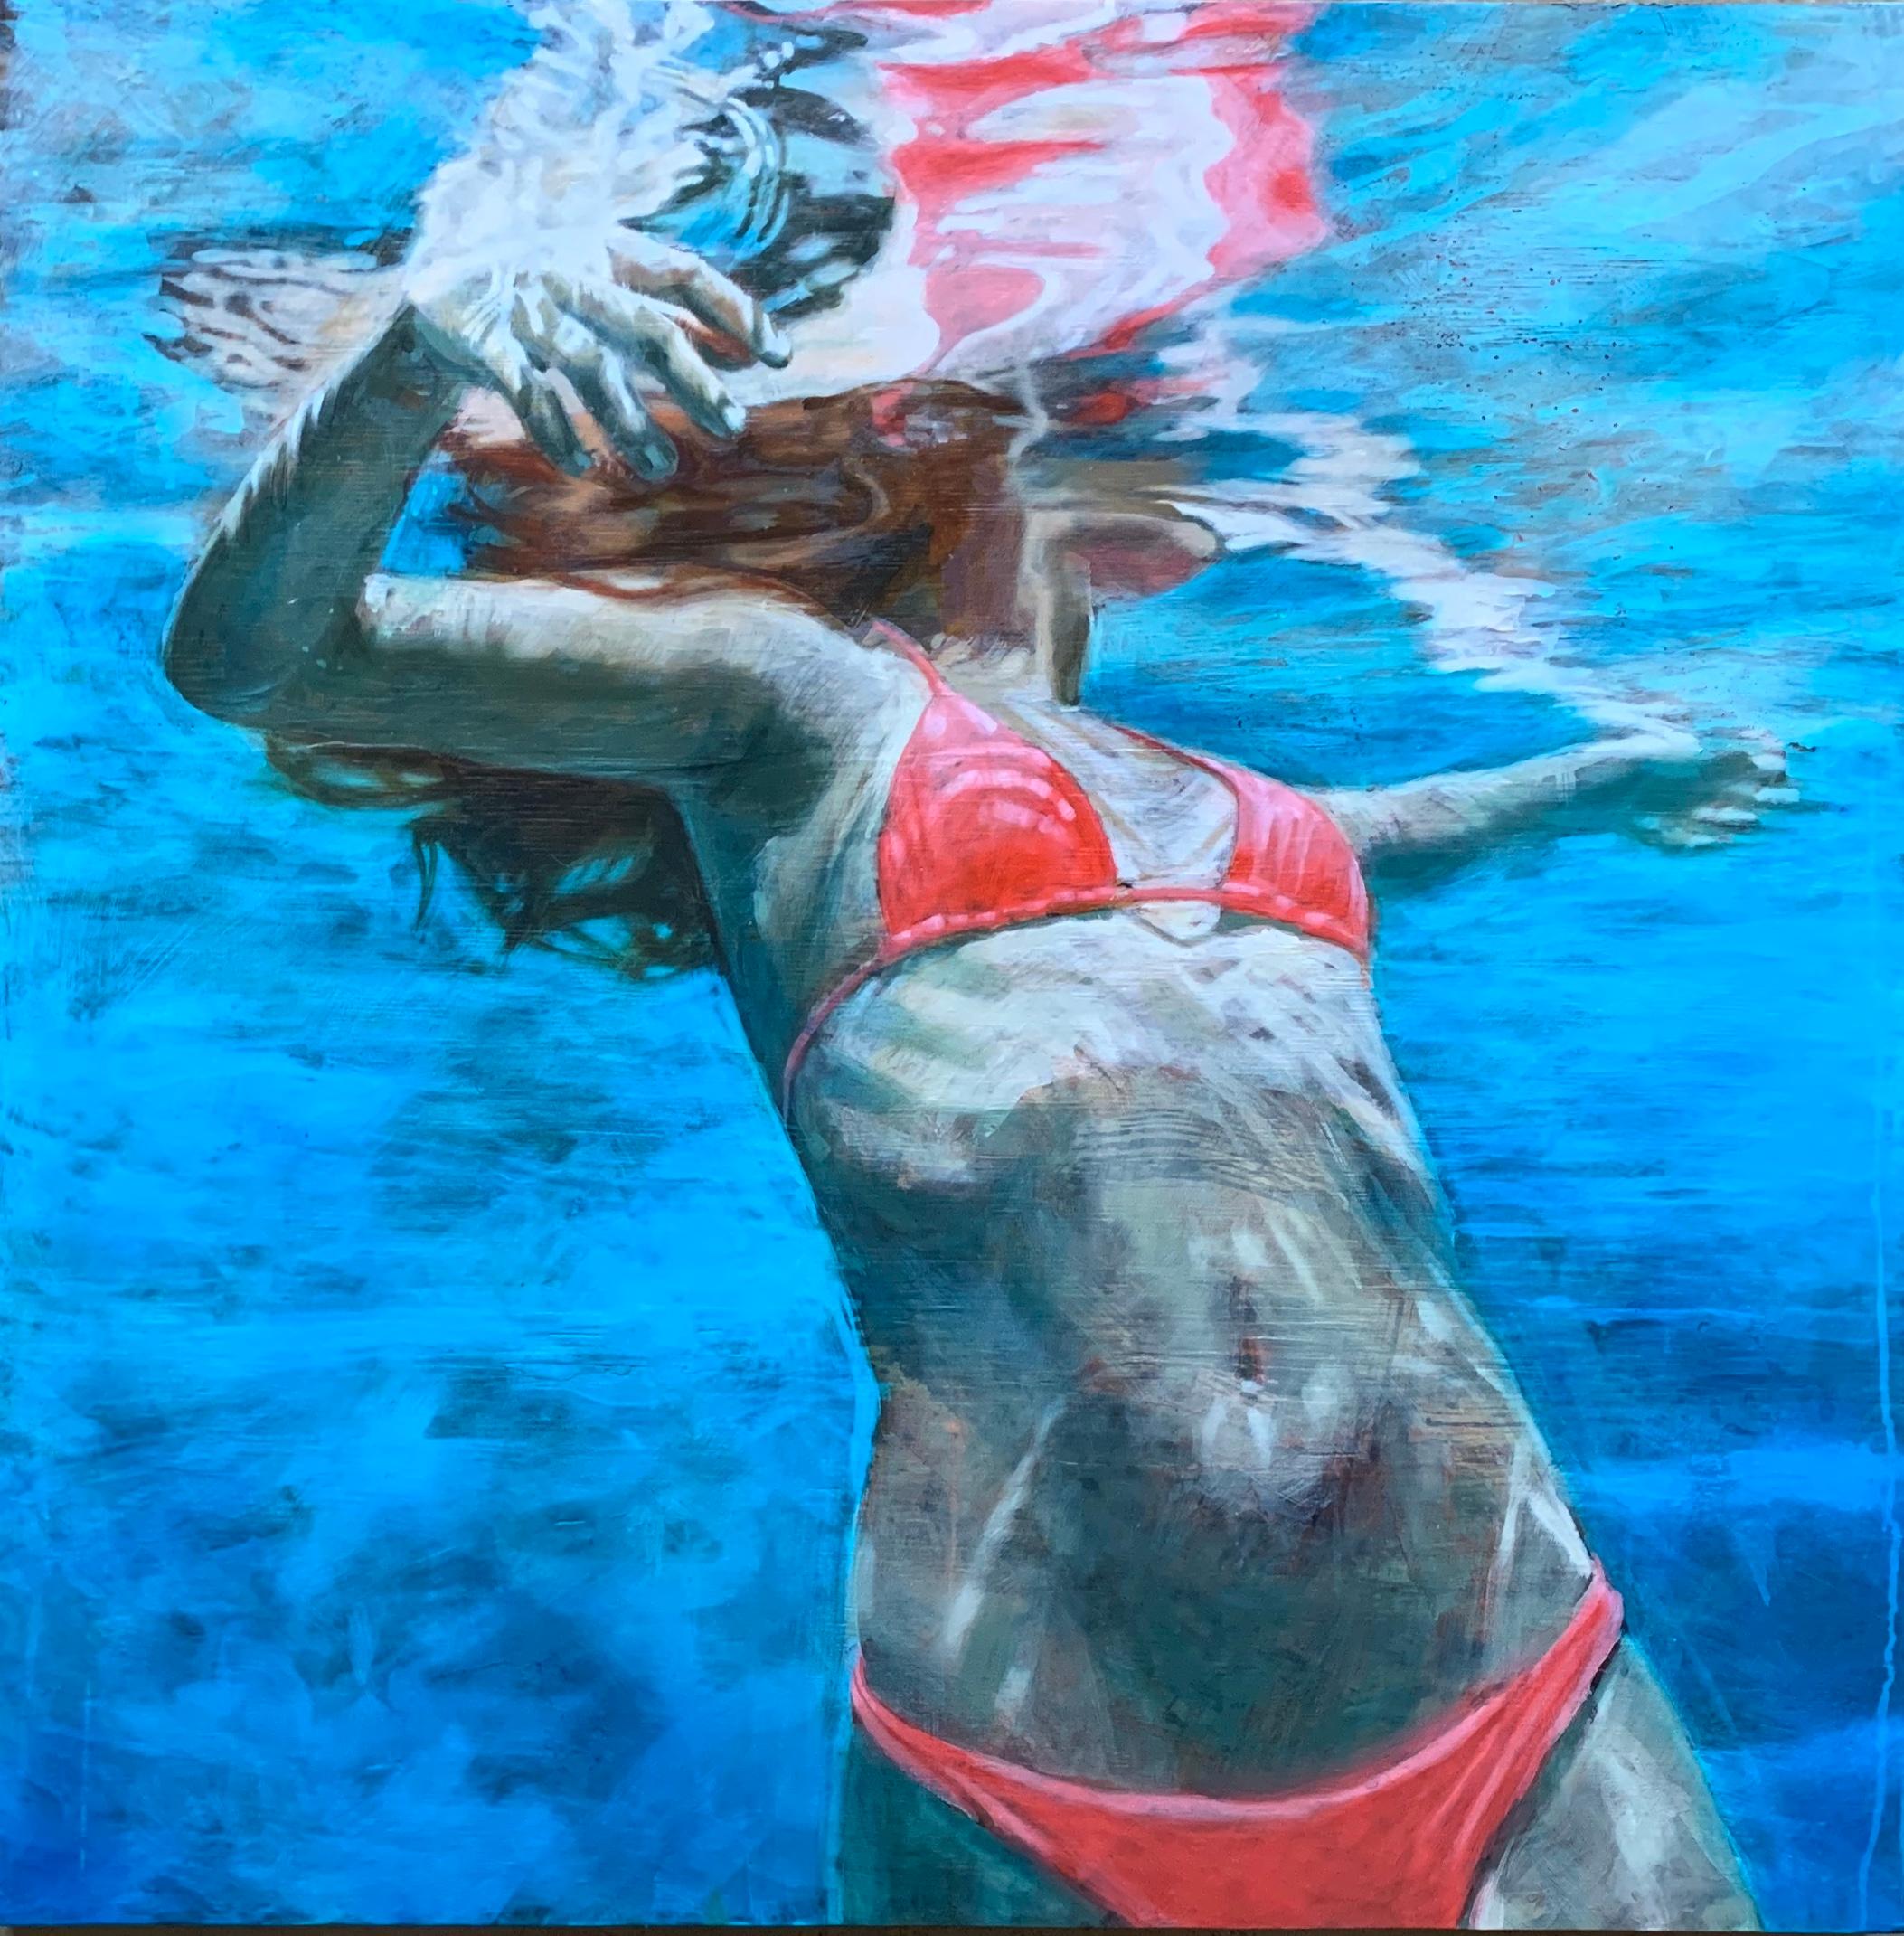 Carol Bennett Figurative Painting - "Summer Traveler" oil painting of a woman in red bikini in turquoise water